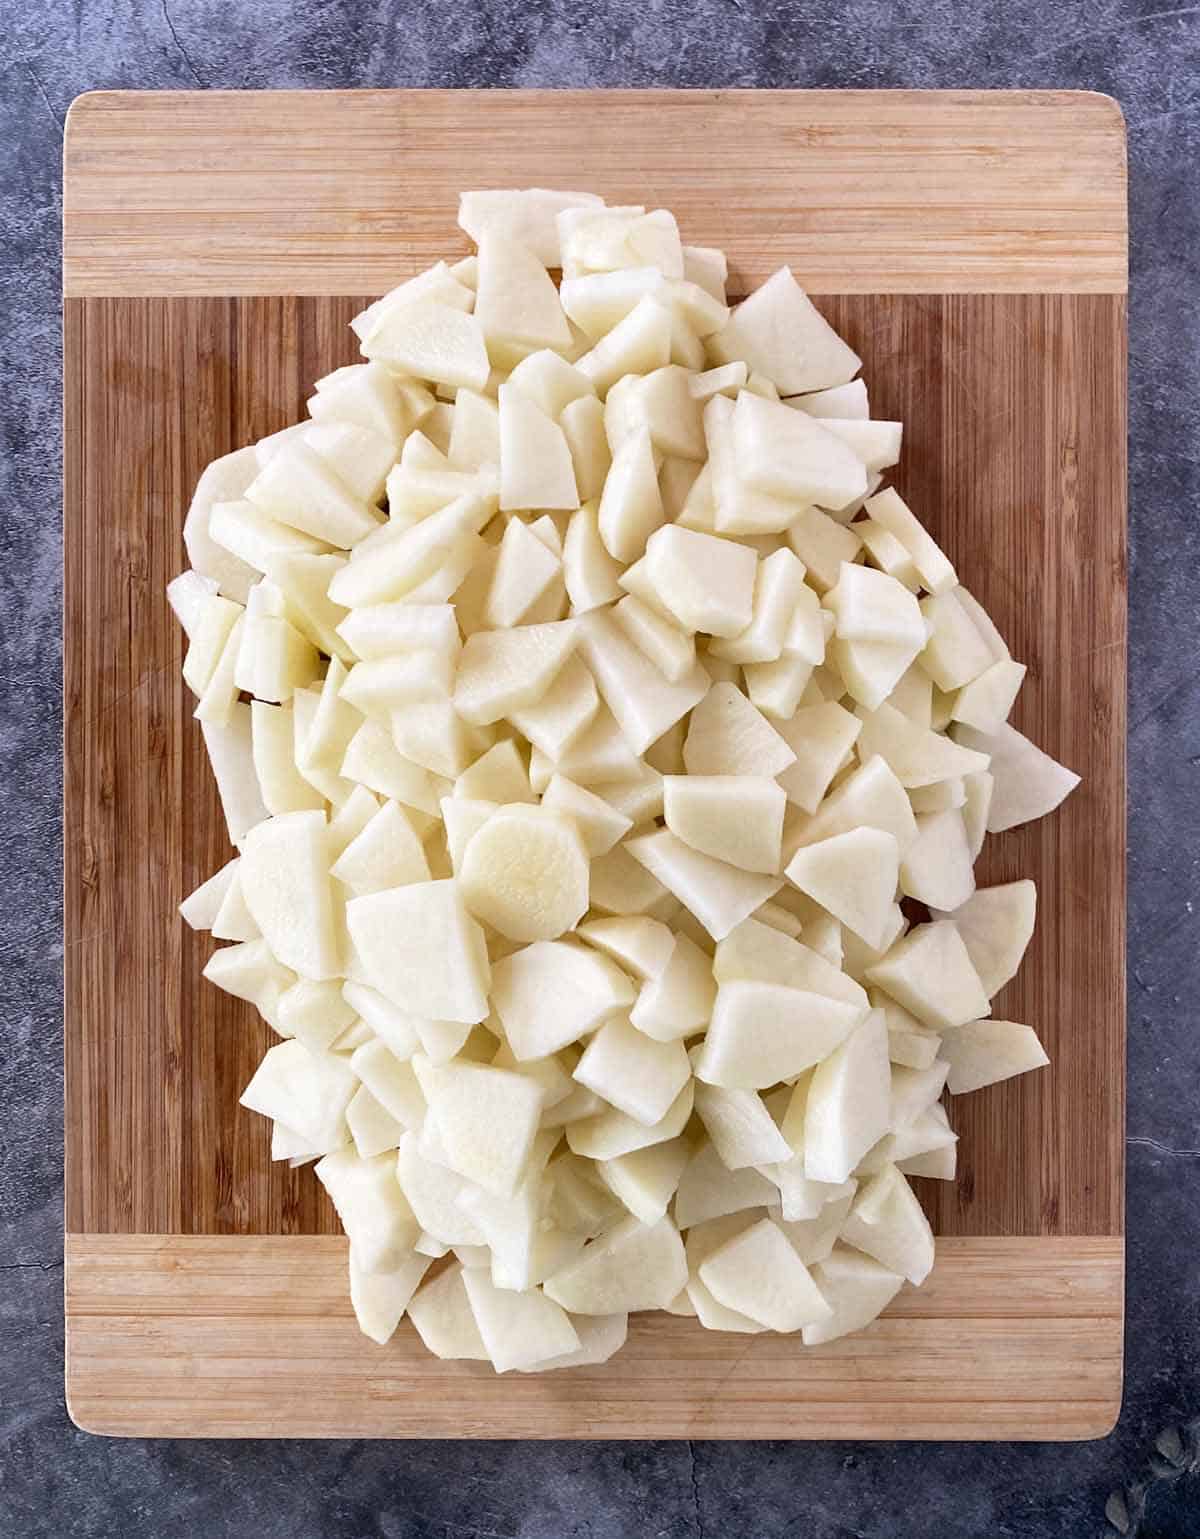 A pile of sliced, peeled potatoes on a bamboo cutting board.